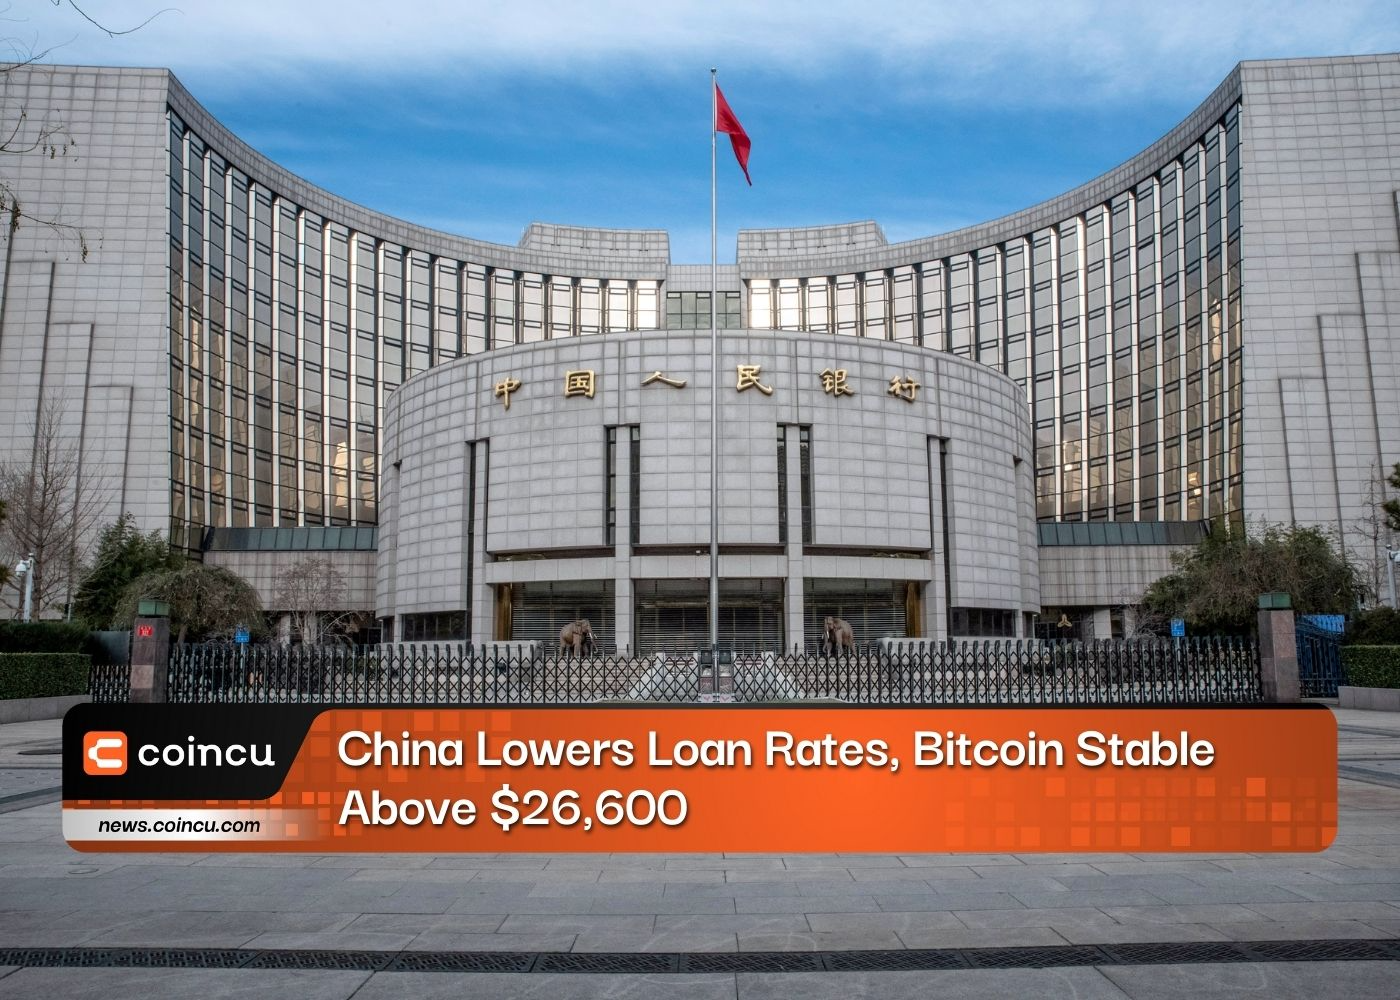 China Lowers Loan Rates, Bitcoin Stable Above $26,600